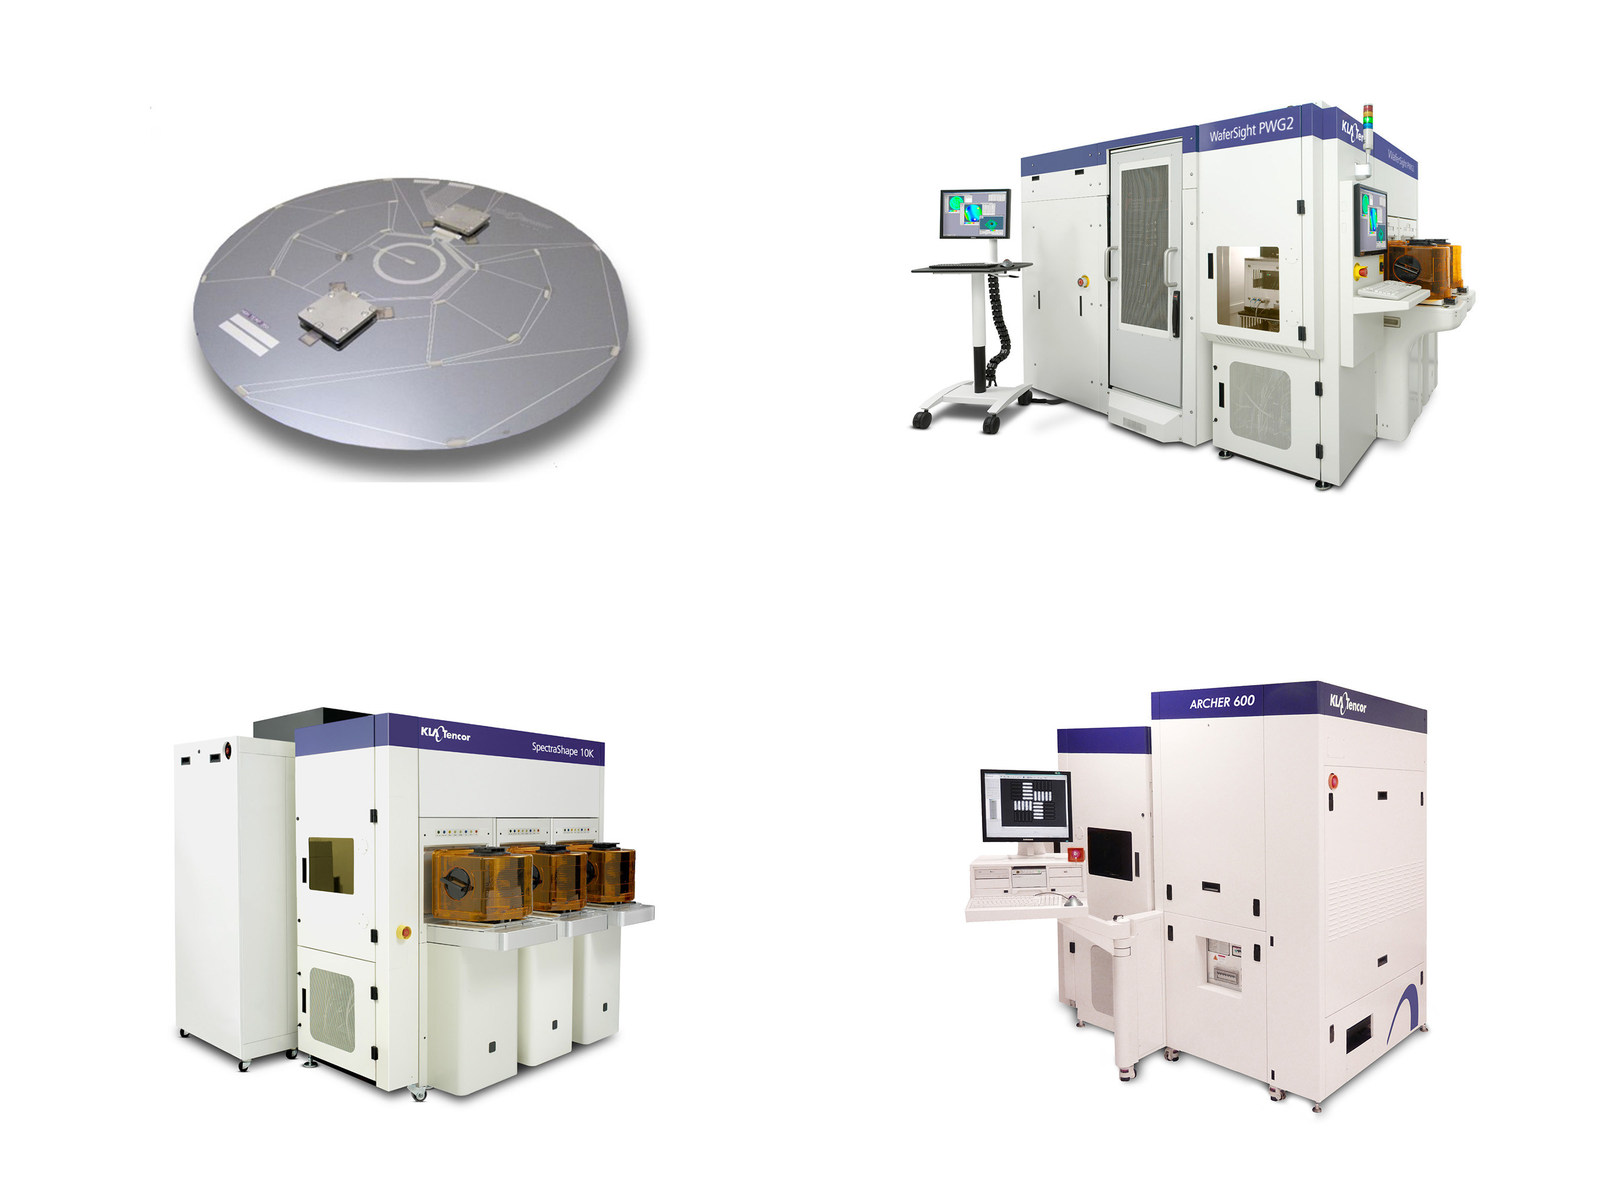 KLA-Tencor's New Metrology Systems for Leading-Edge Integrated Circuit Device Technologies